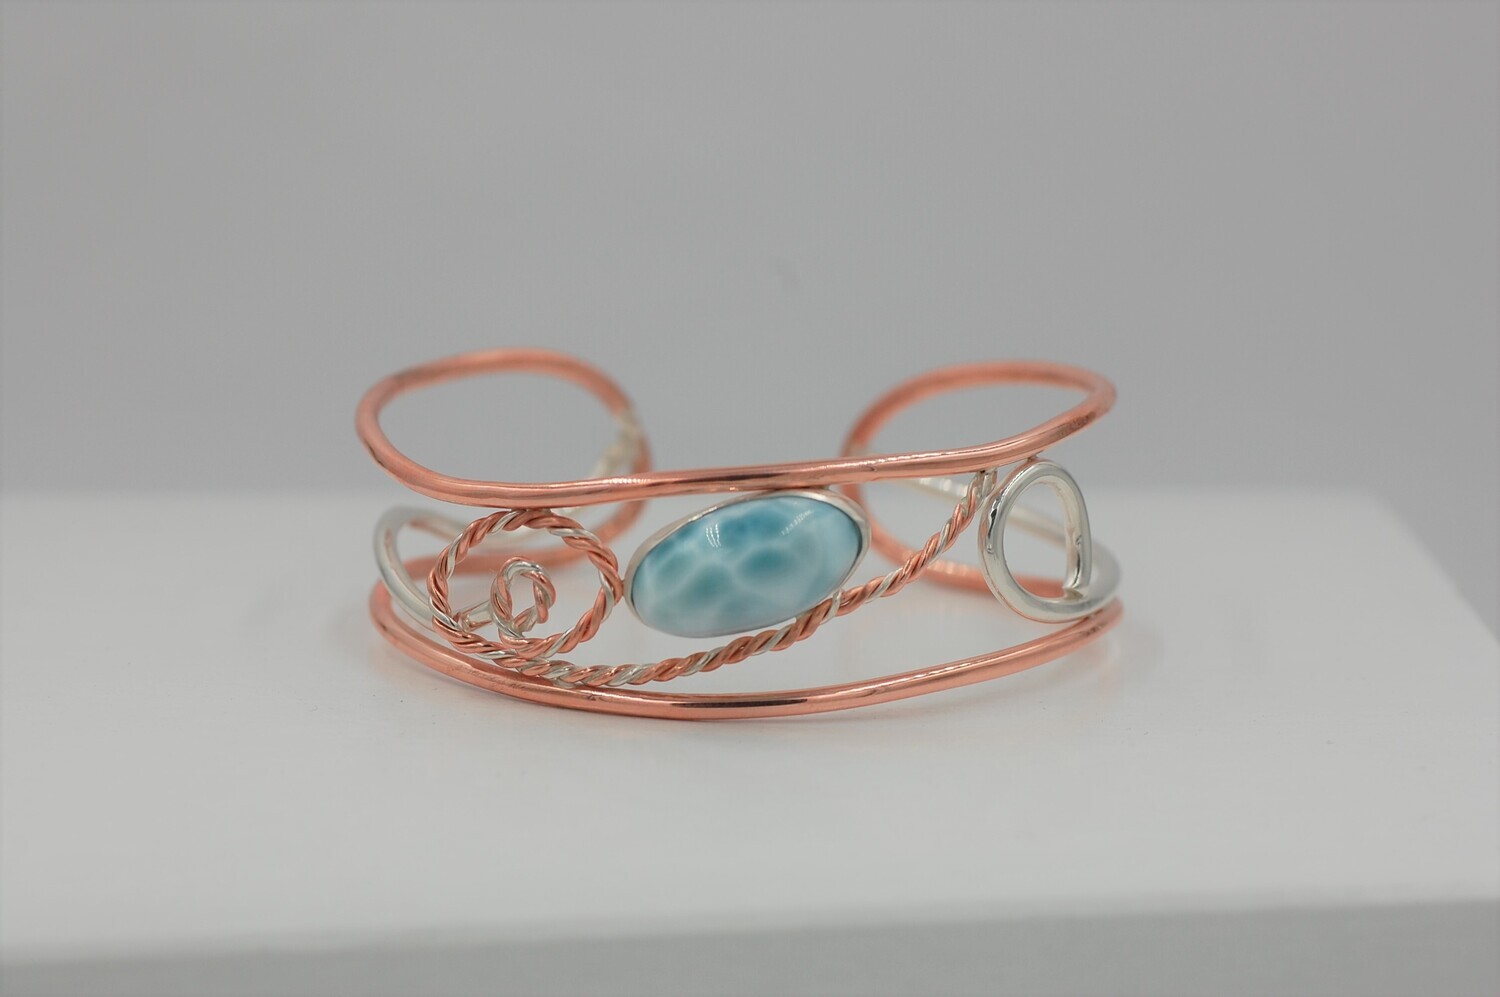 Hand made copper & silver cuff set with an oval Larimar .925